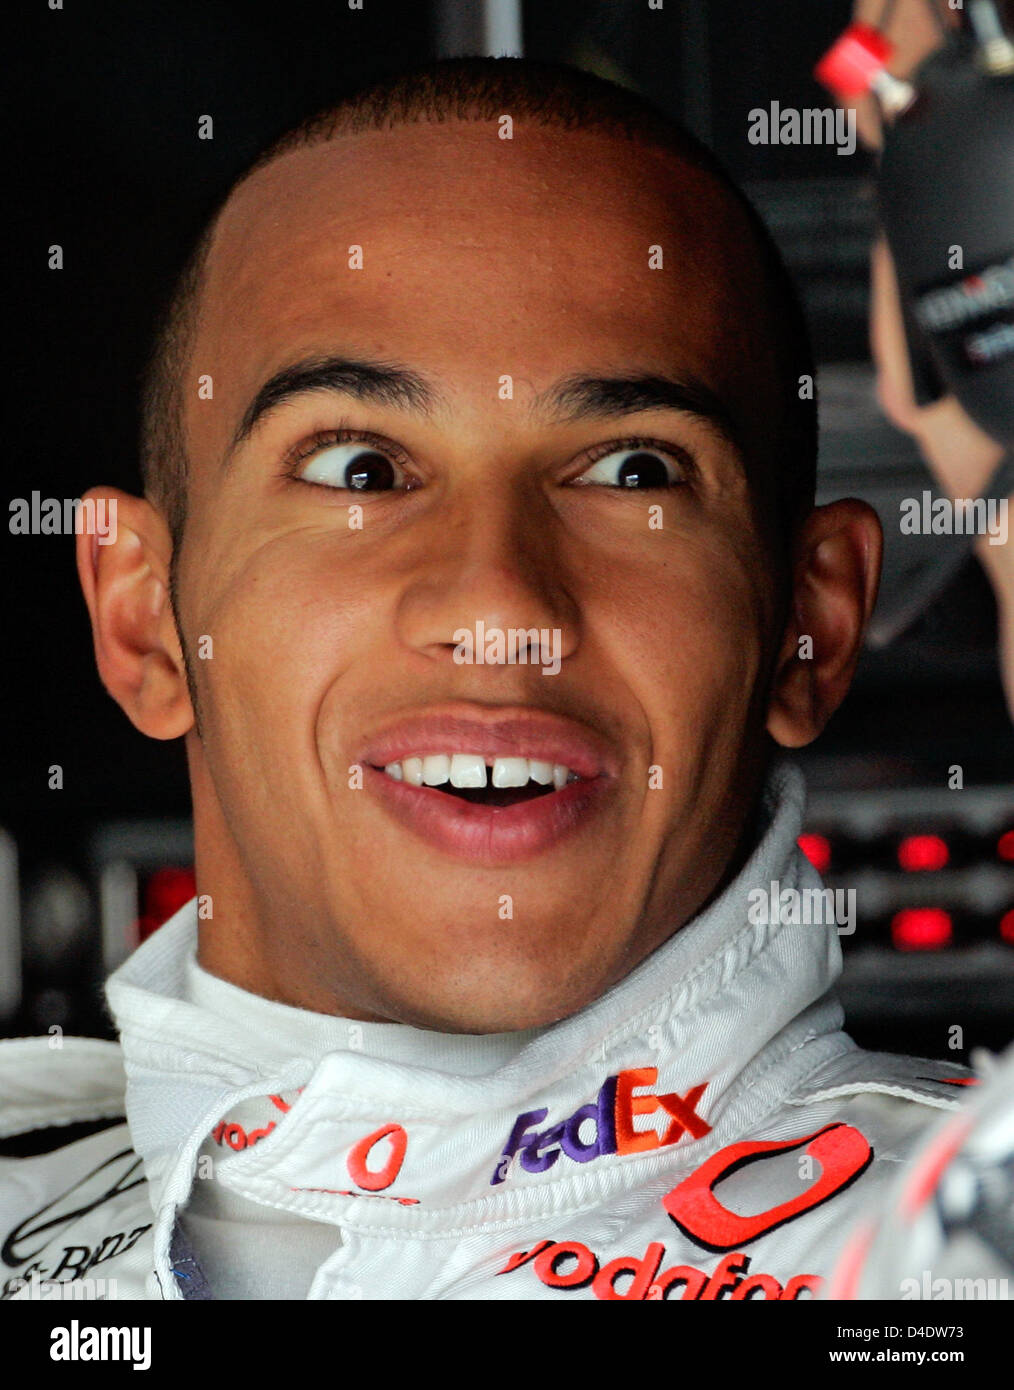 British Formula One driver Lewis Hamilton of McLaren Mercedes smiles during the first practice session at Circuit de Catalunya in Montmelo near Barcelona, Spain, 24 April 2008. The Formula 1 Grand Prix of Spain be held here on 27 April. Photo: Felix Heyder Stock Photo